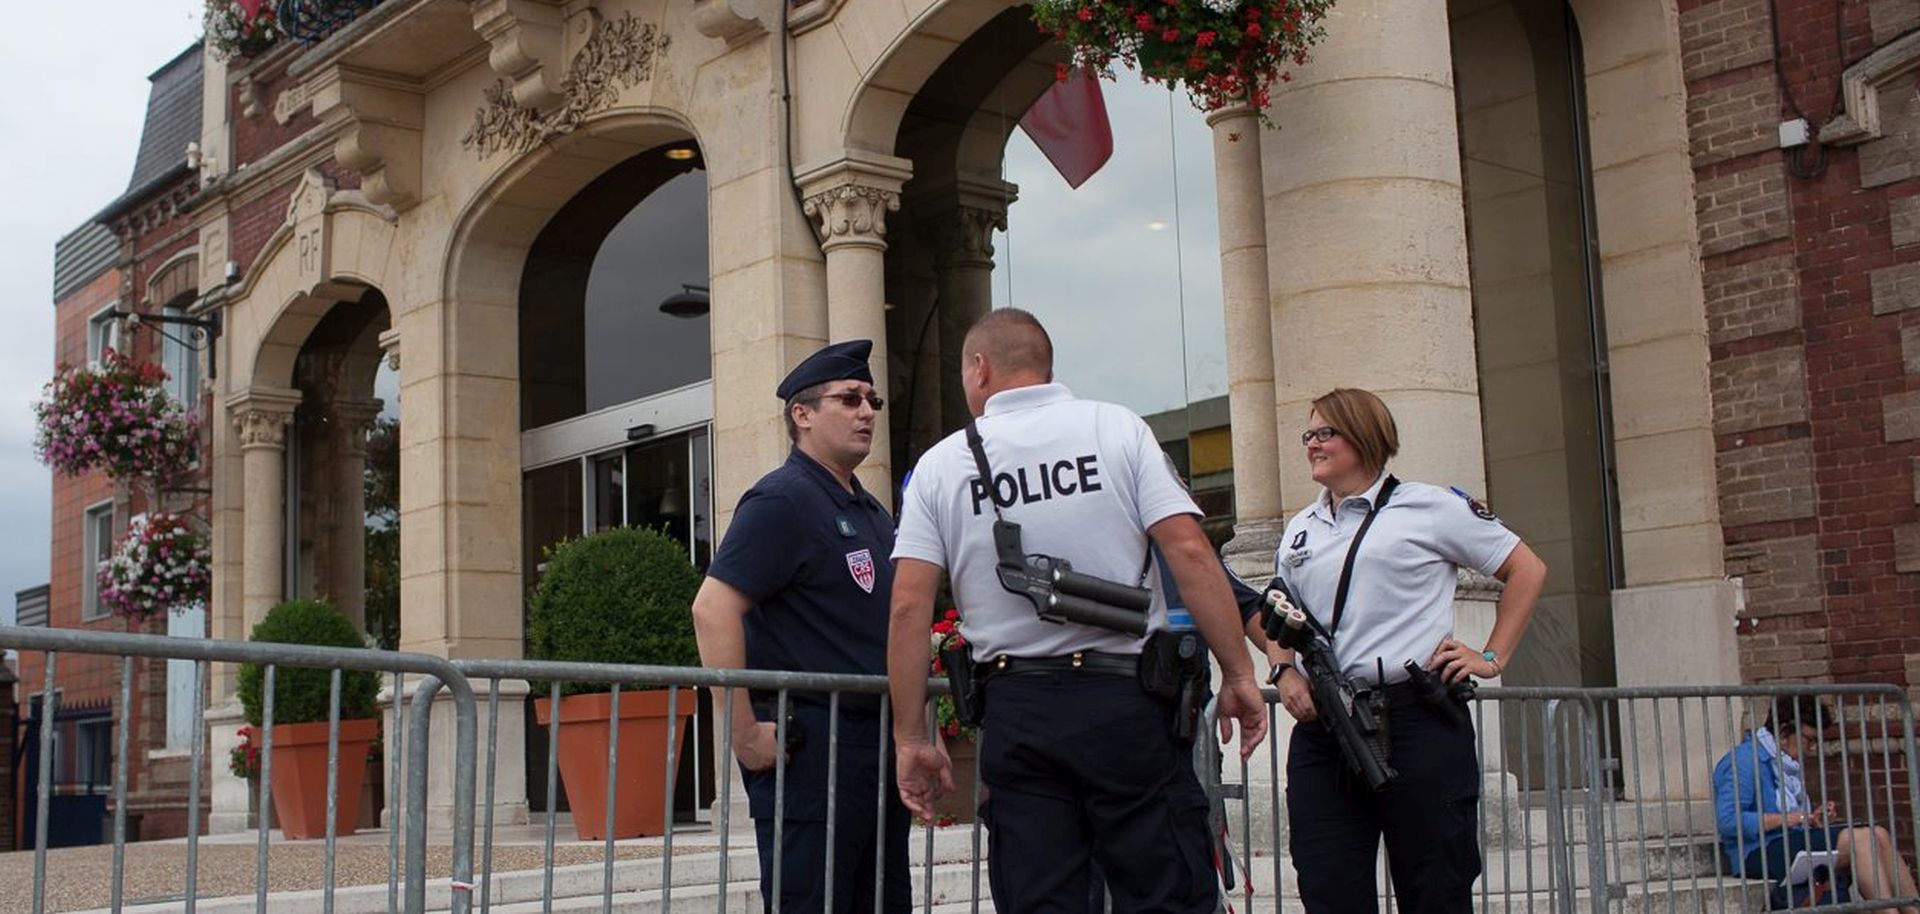 epa05442141 Police officers on guard in front of the city hall after a fatal hostage taking incident at a church in Saint-Etienne-du-Rouvray, near Rouen, France, 26 July 2016. According to reports, two hostage takers were killed by the police after they took hostages at a church in Saint Etienne du Douvray. One of the hostages, a priest was killed by one of the perpetrators.  EPA/JULIEN PAQUIN